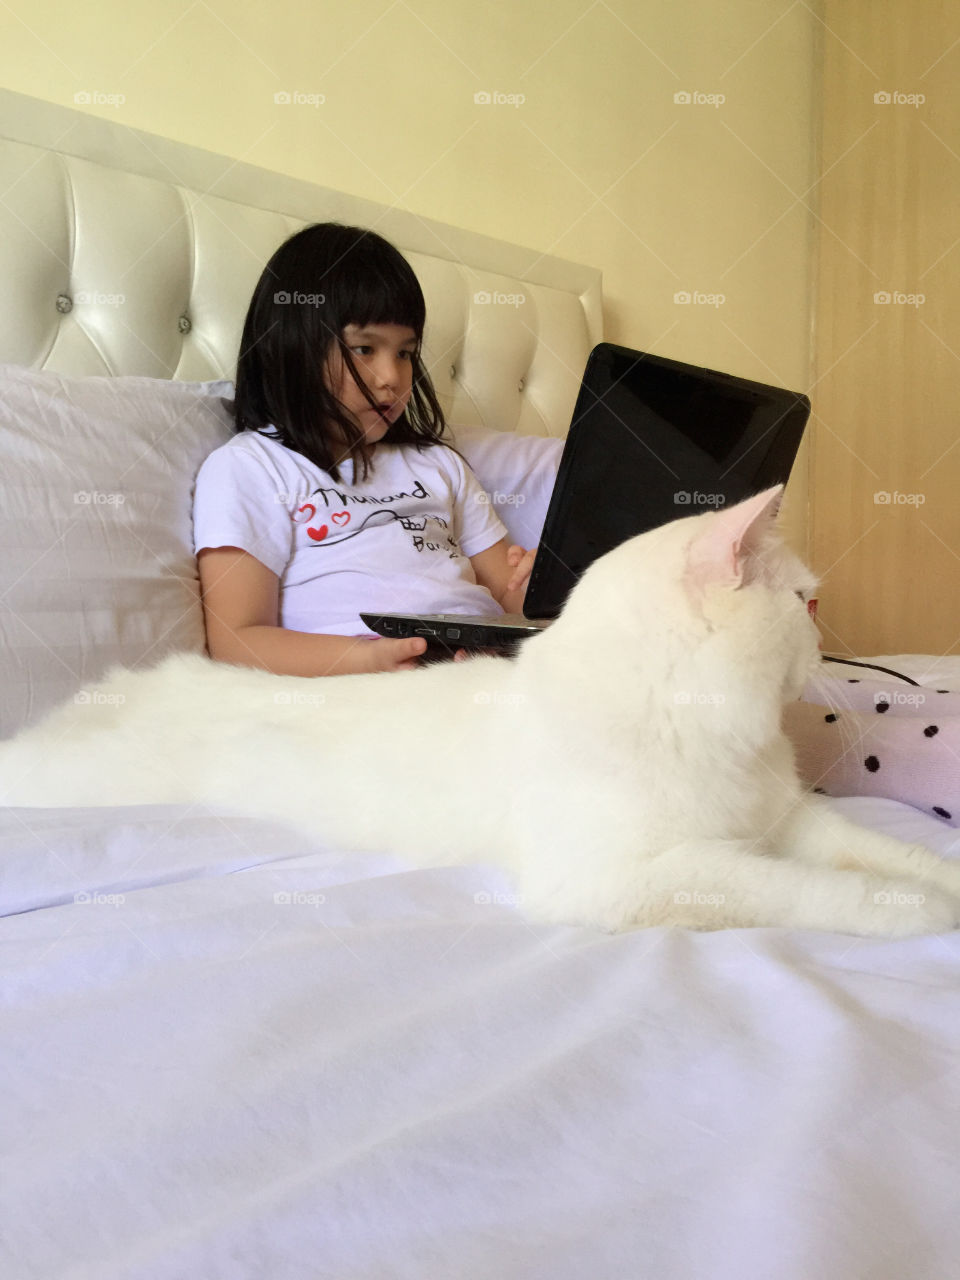 Girl sitting on bed using laptop